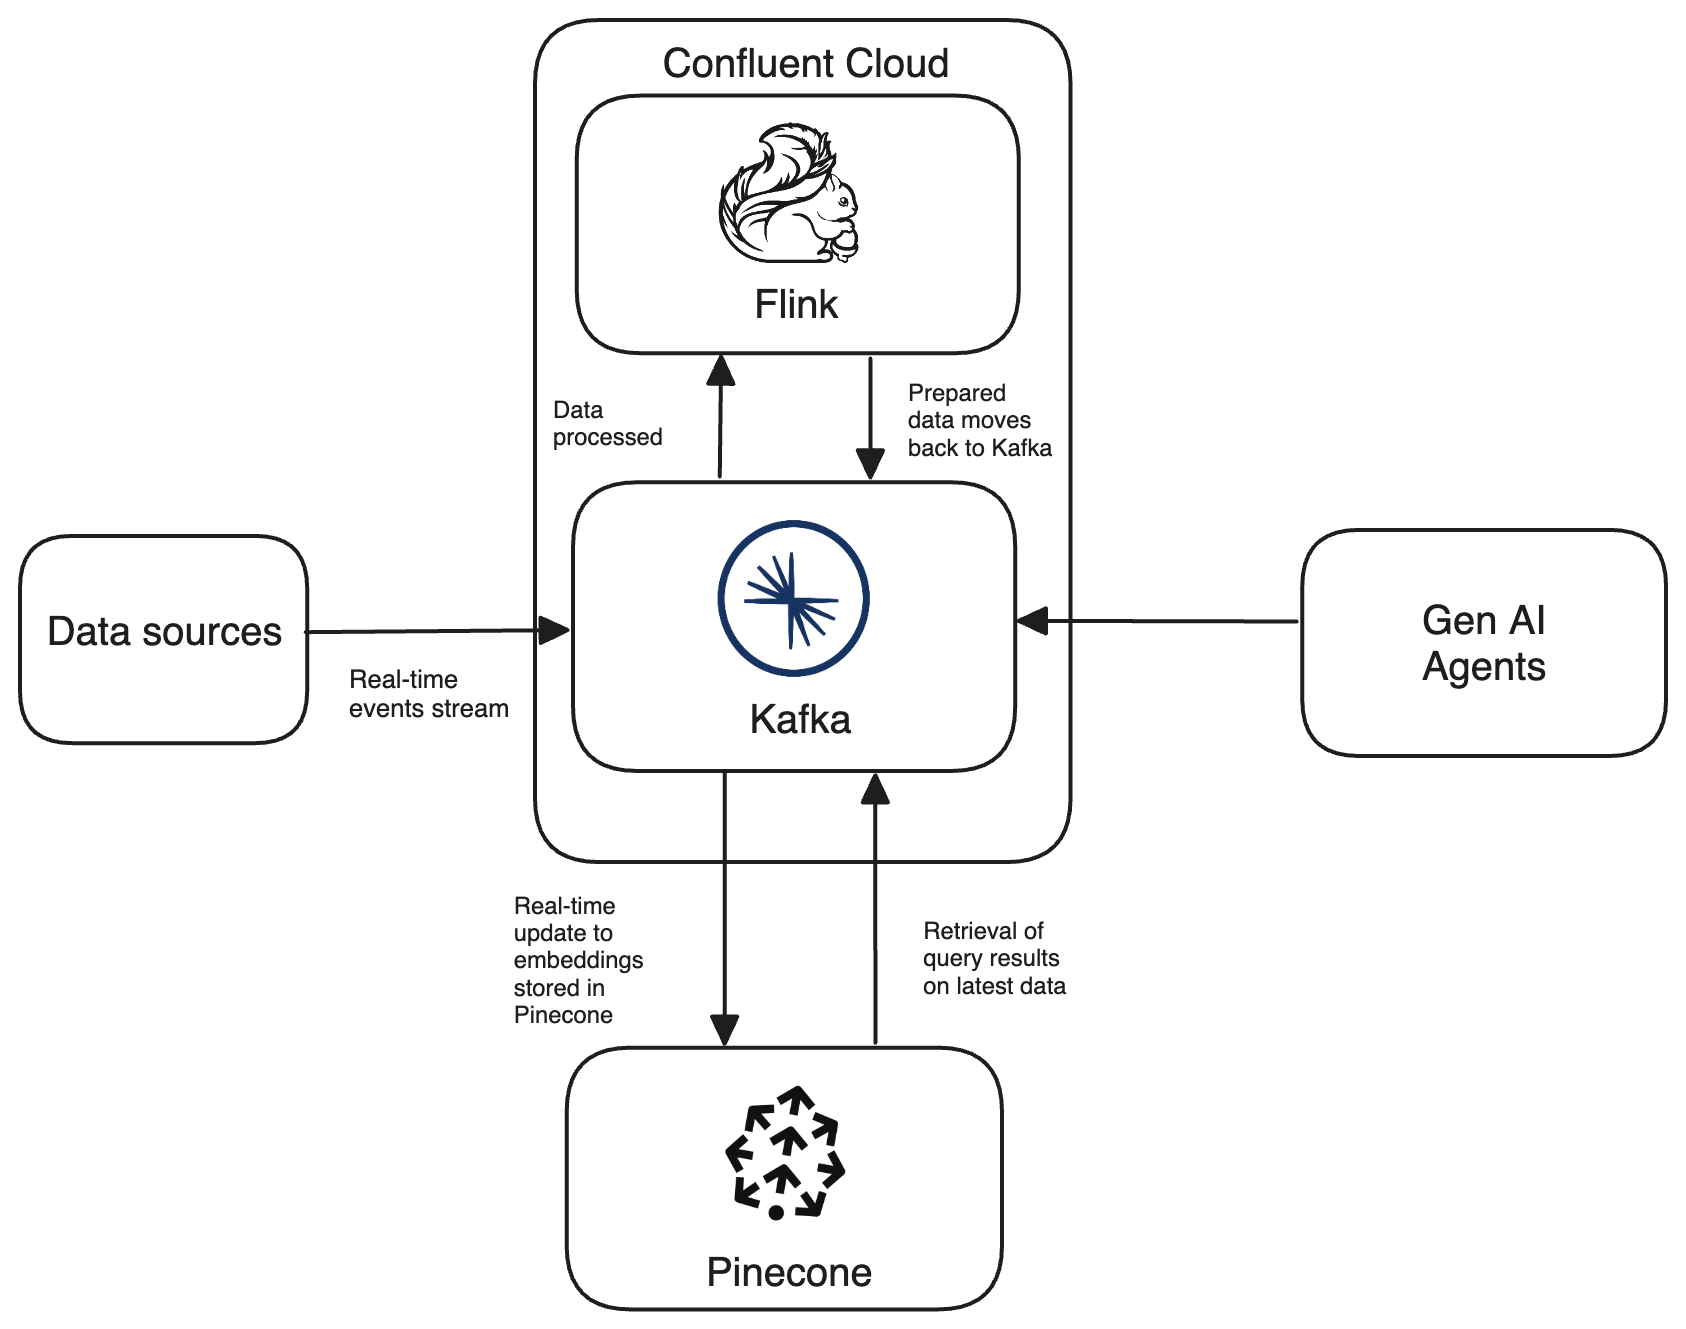 Pinecone and Confluent enable simple development of GenAI applications